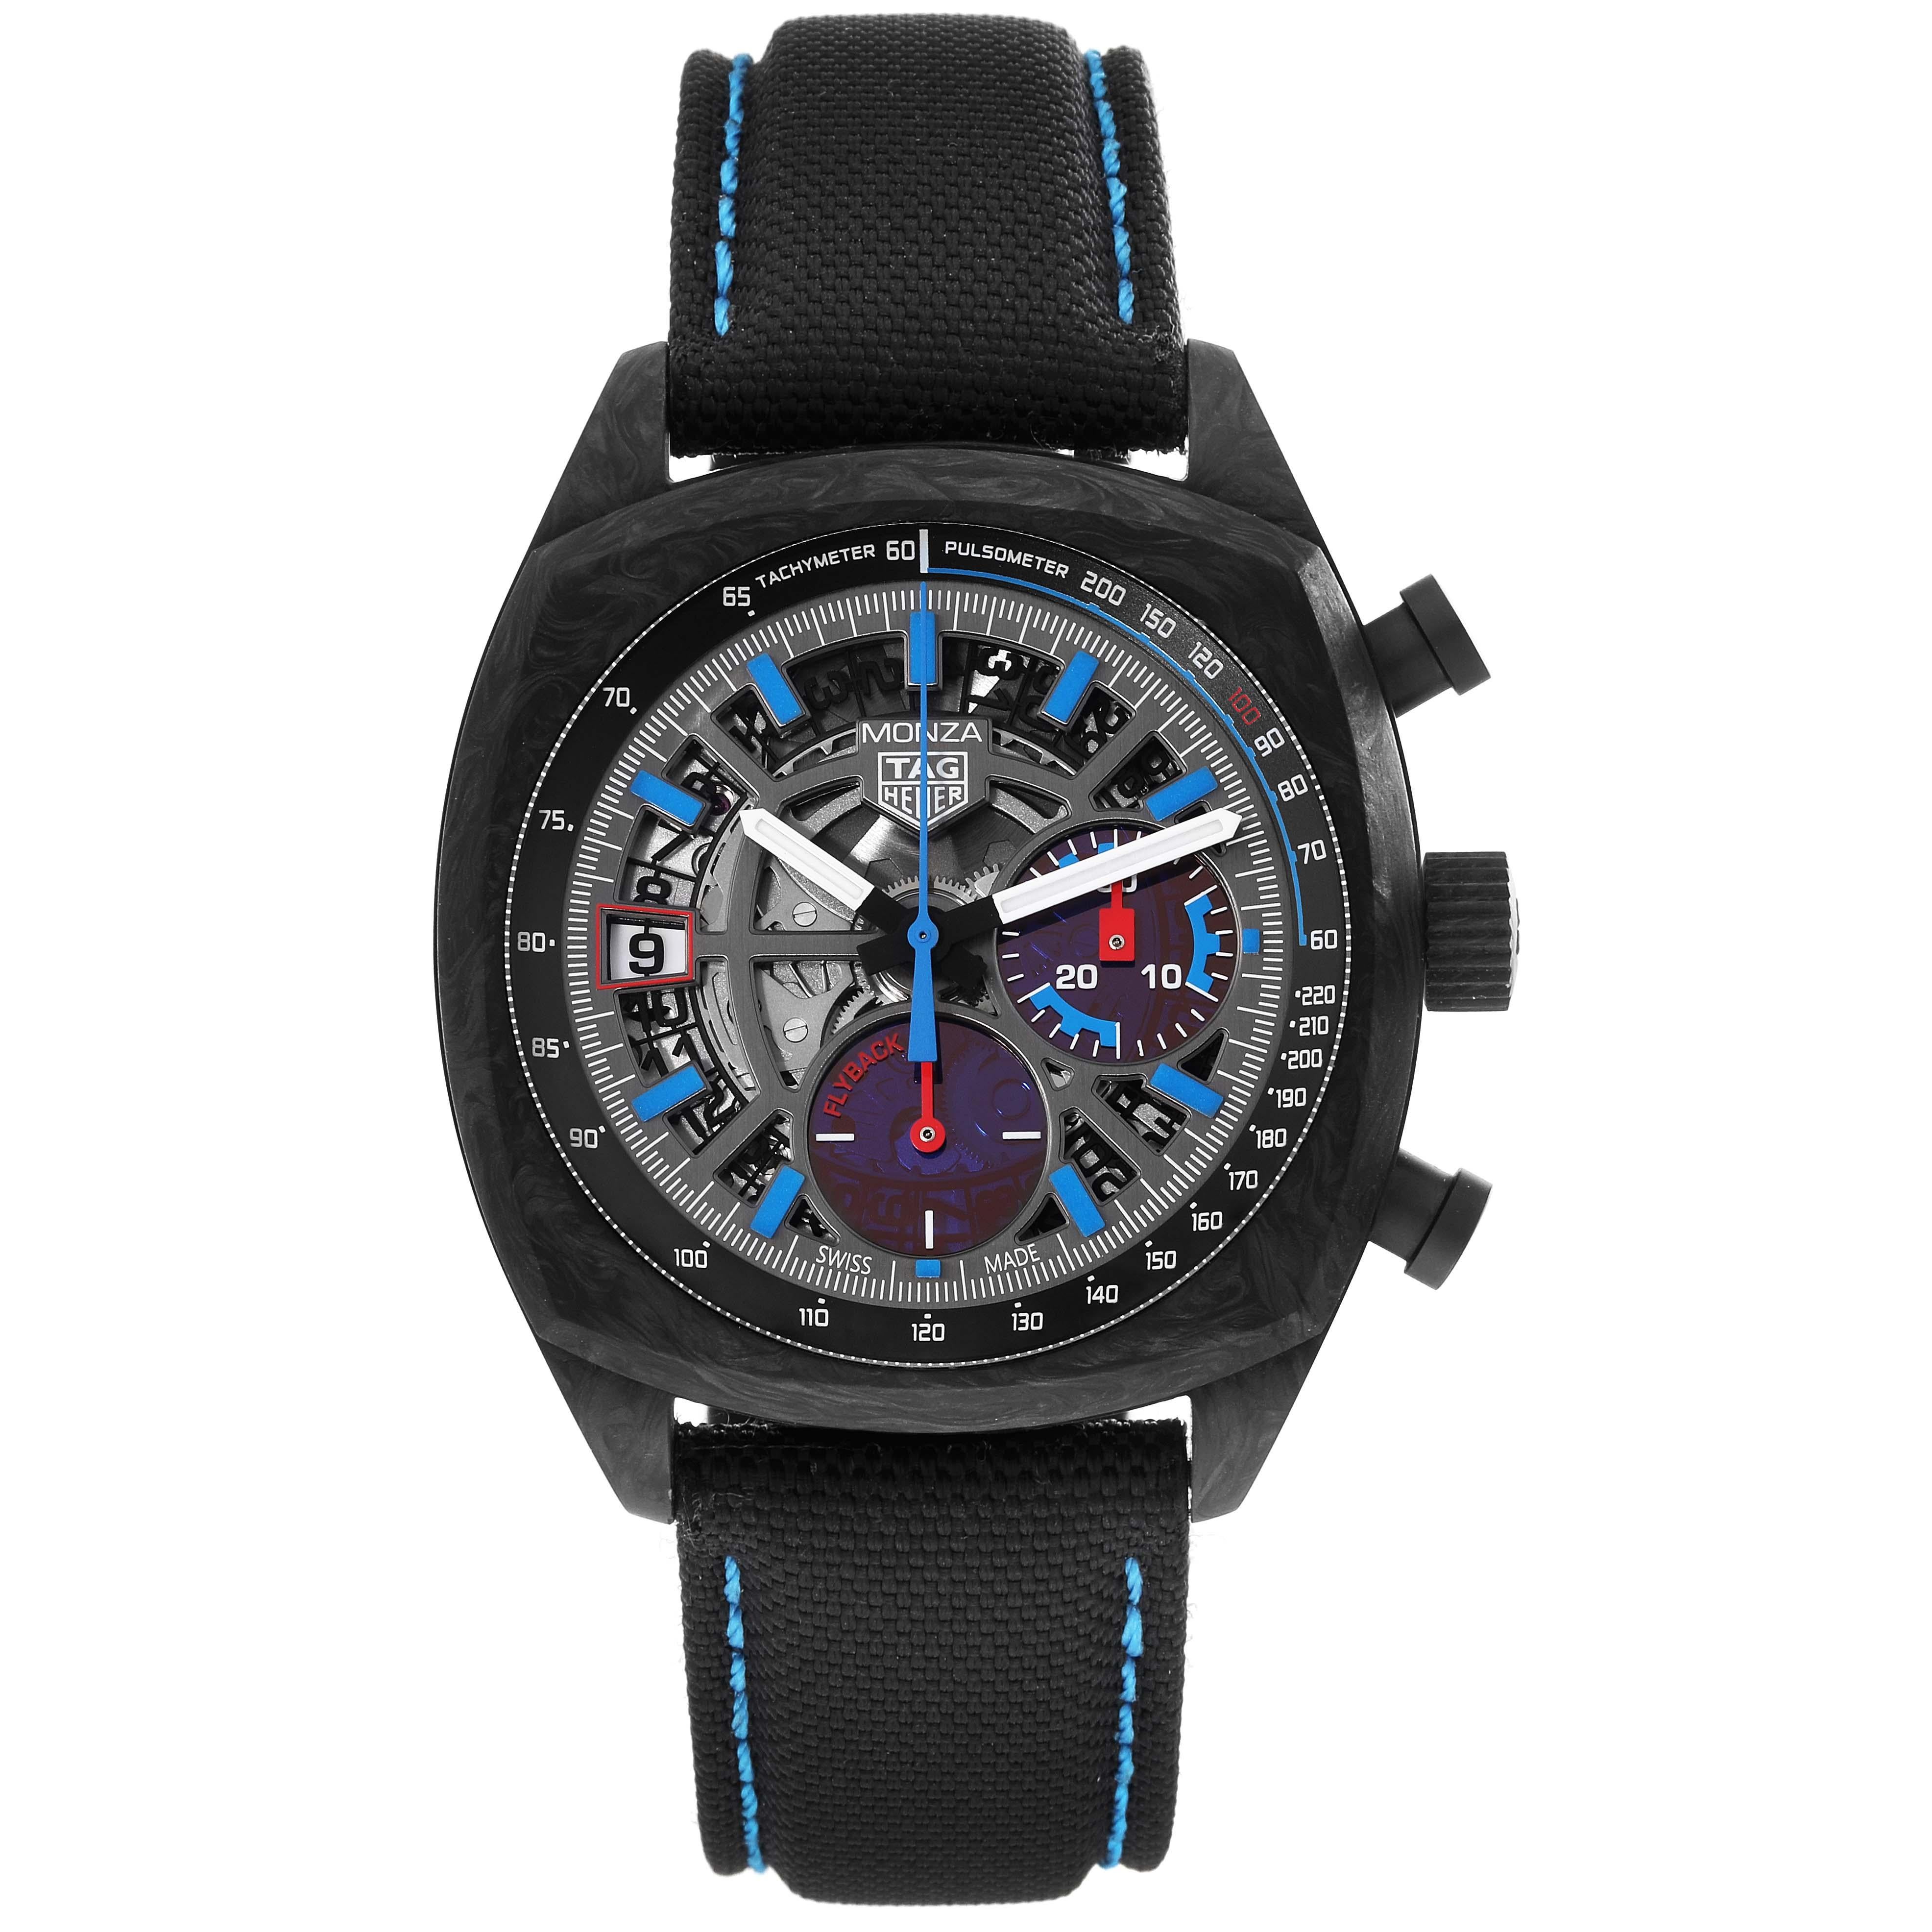 Tag Heuer Monza Flyback Chronometer Carbon Mens Watch CR5090 Unworn. Automatic self-winding chronograph movement. Carbon cushion shaped 42mm case. PVD titanium and exhibition transparent sapphire crystal caseback. . Scratch resistant sapphire